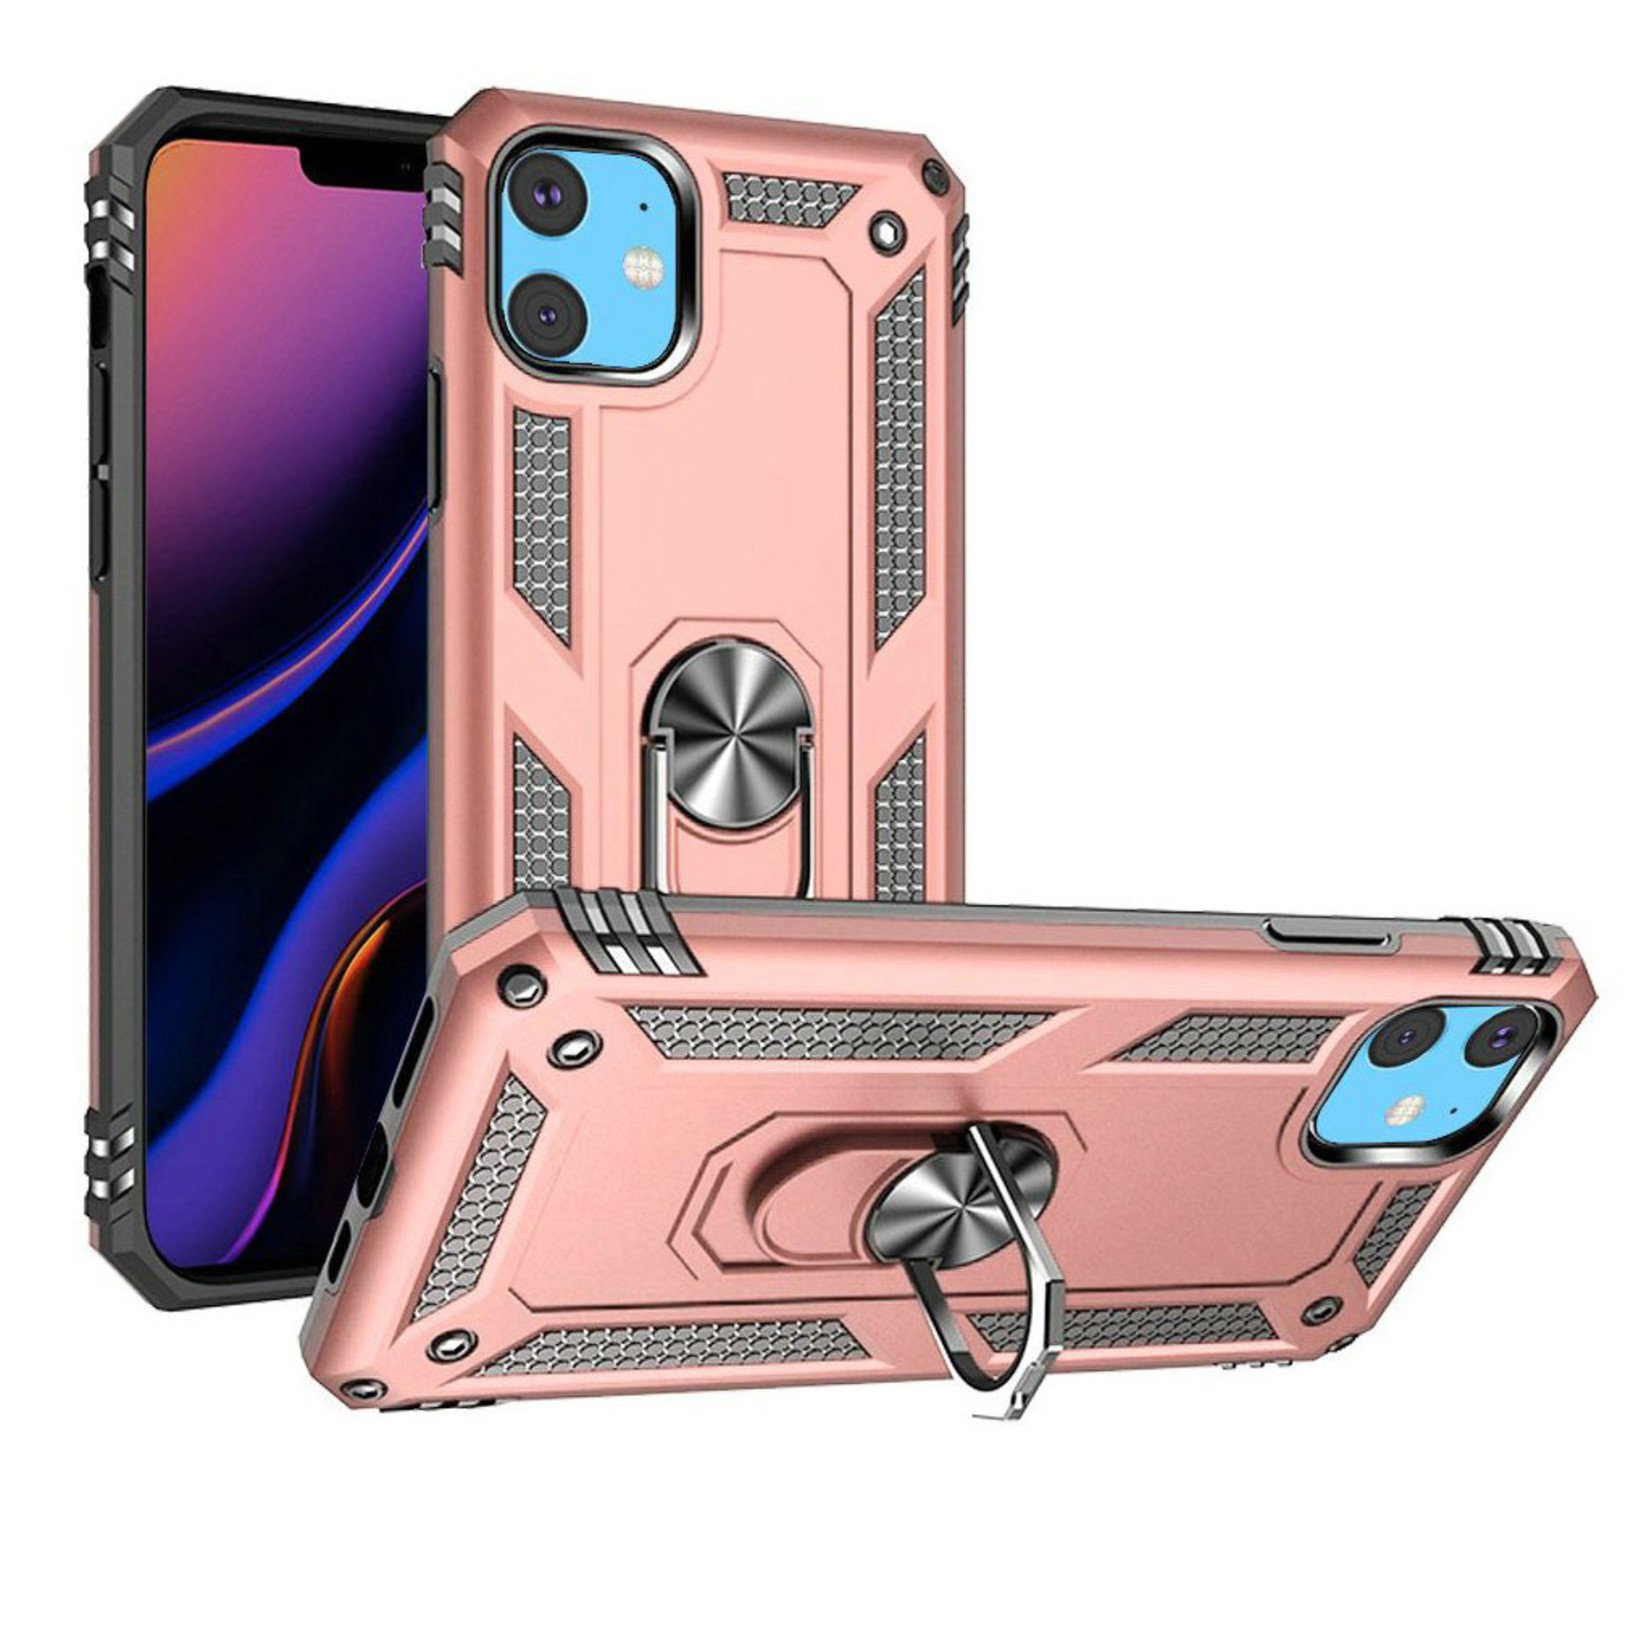 Slim Hybrid PC TPU Magnetic Ring Case for iPhone 11 Pro Max